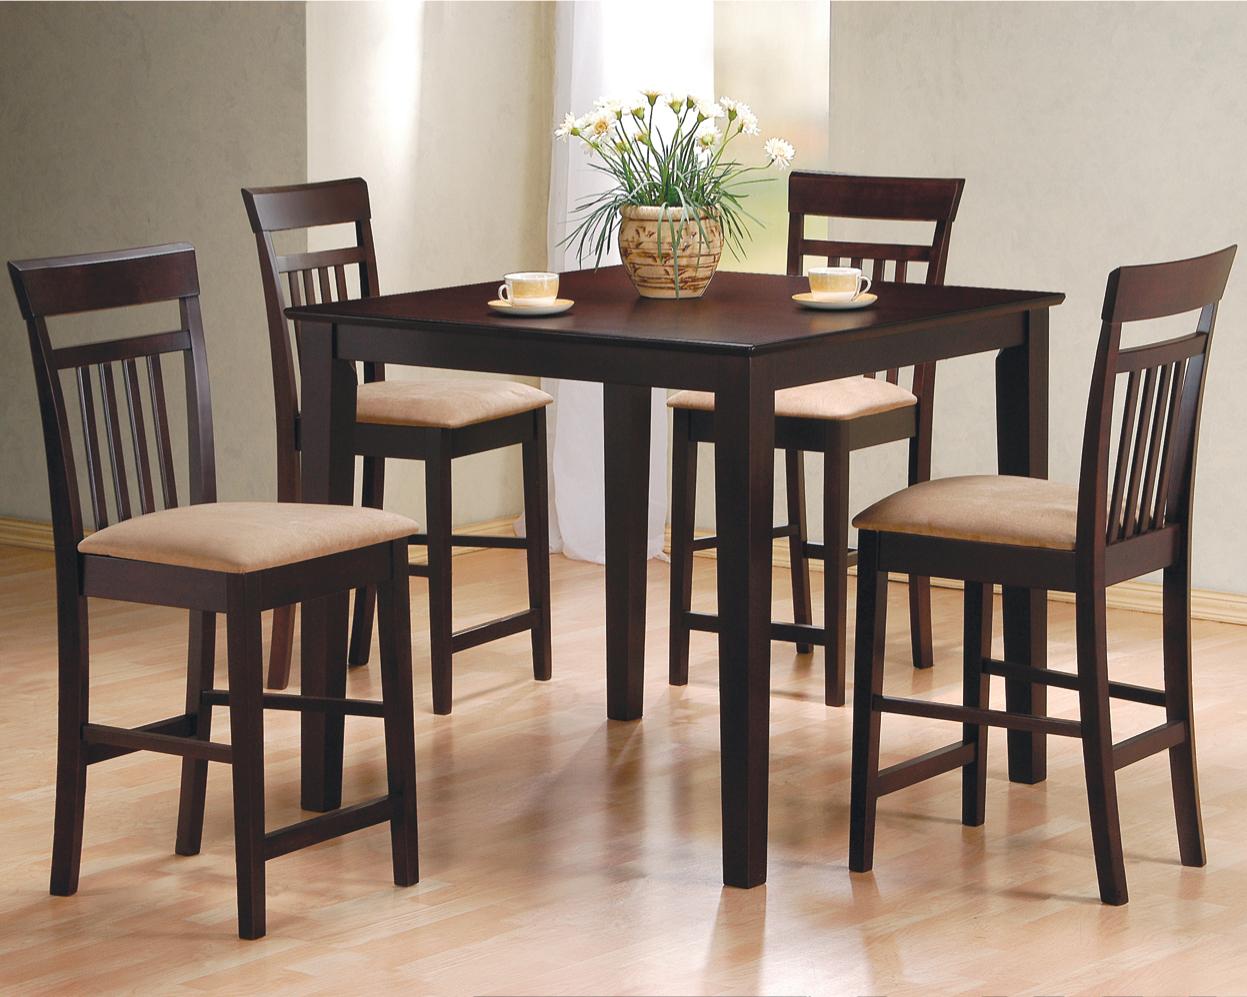 Mix Match 5 Piece Counter Height, High Dining Room Table And Chairs